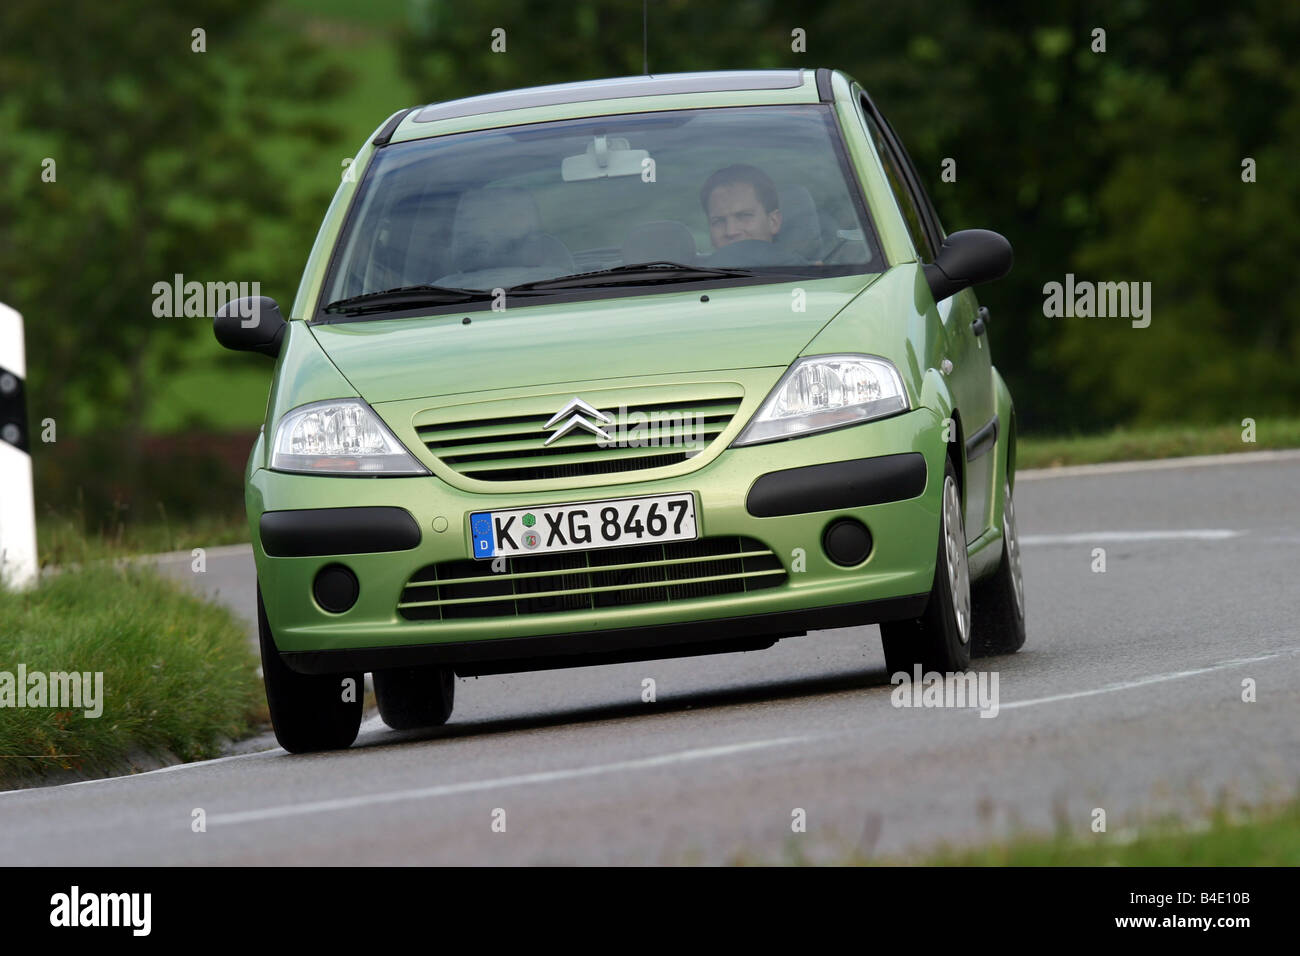 Car, Citroen C3 1.4 HDI, Limousine, small approx., model year 2002-, green, driving, diagonal from the front, frontal view, coun Stock Photo